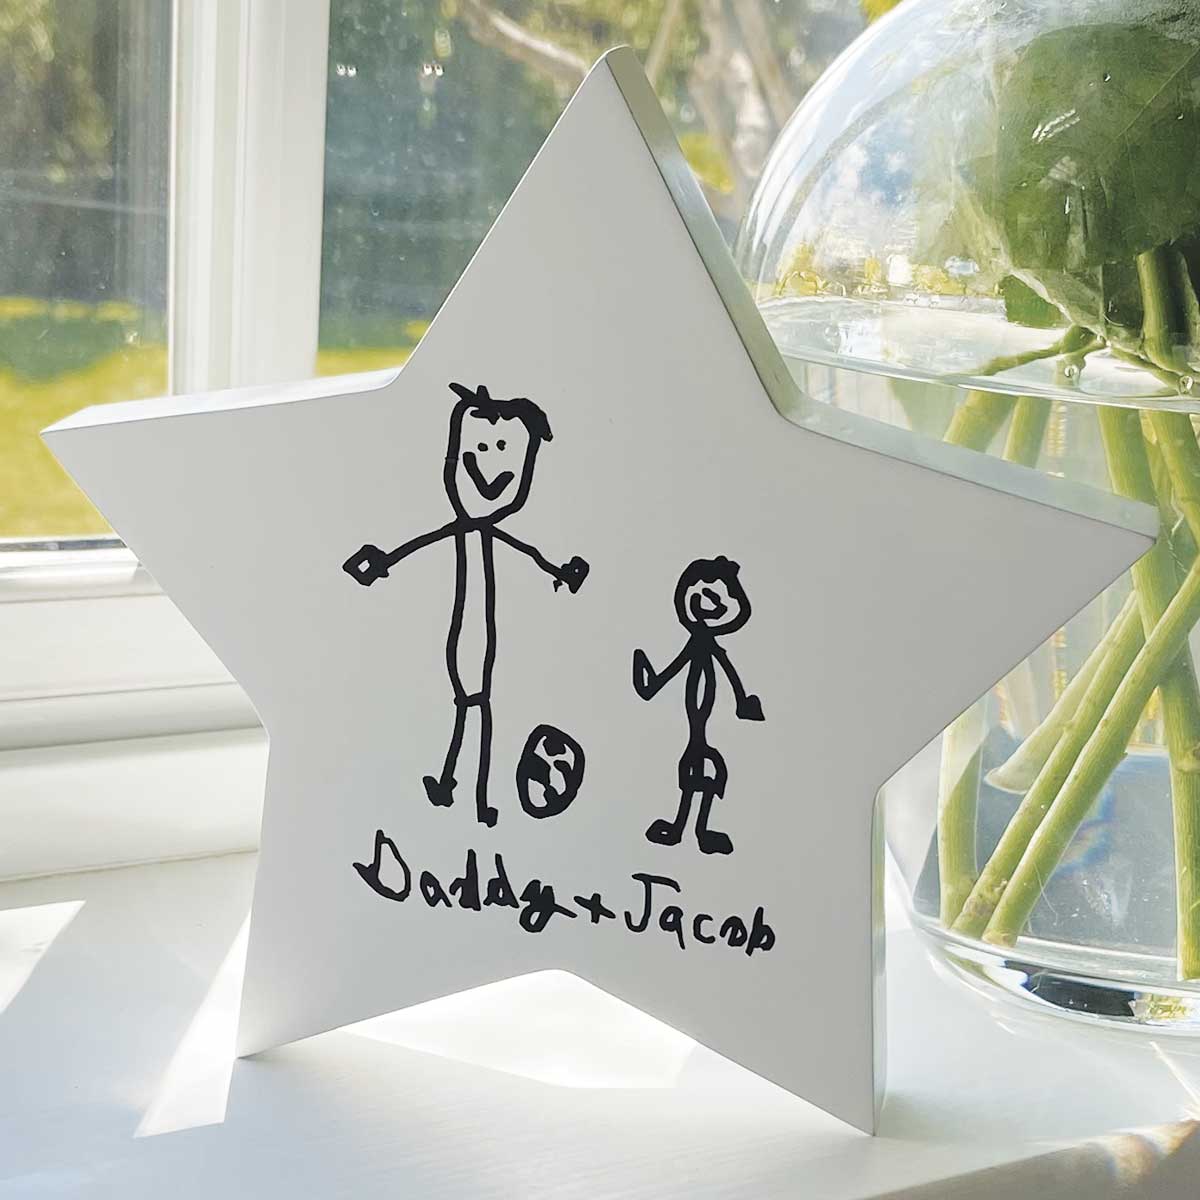 Your Child's Drawing Wooden Freestanding Star